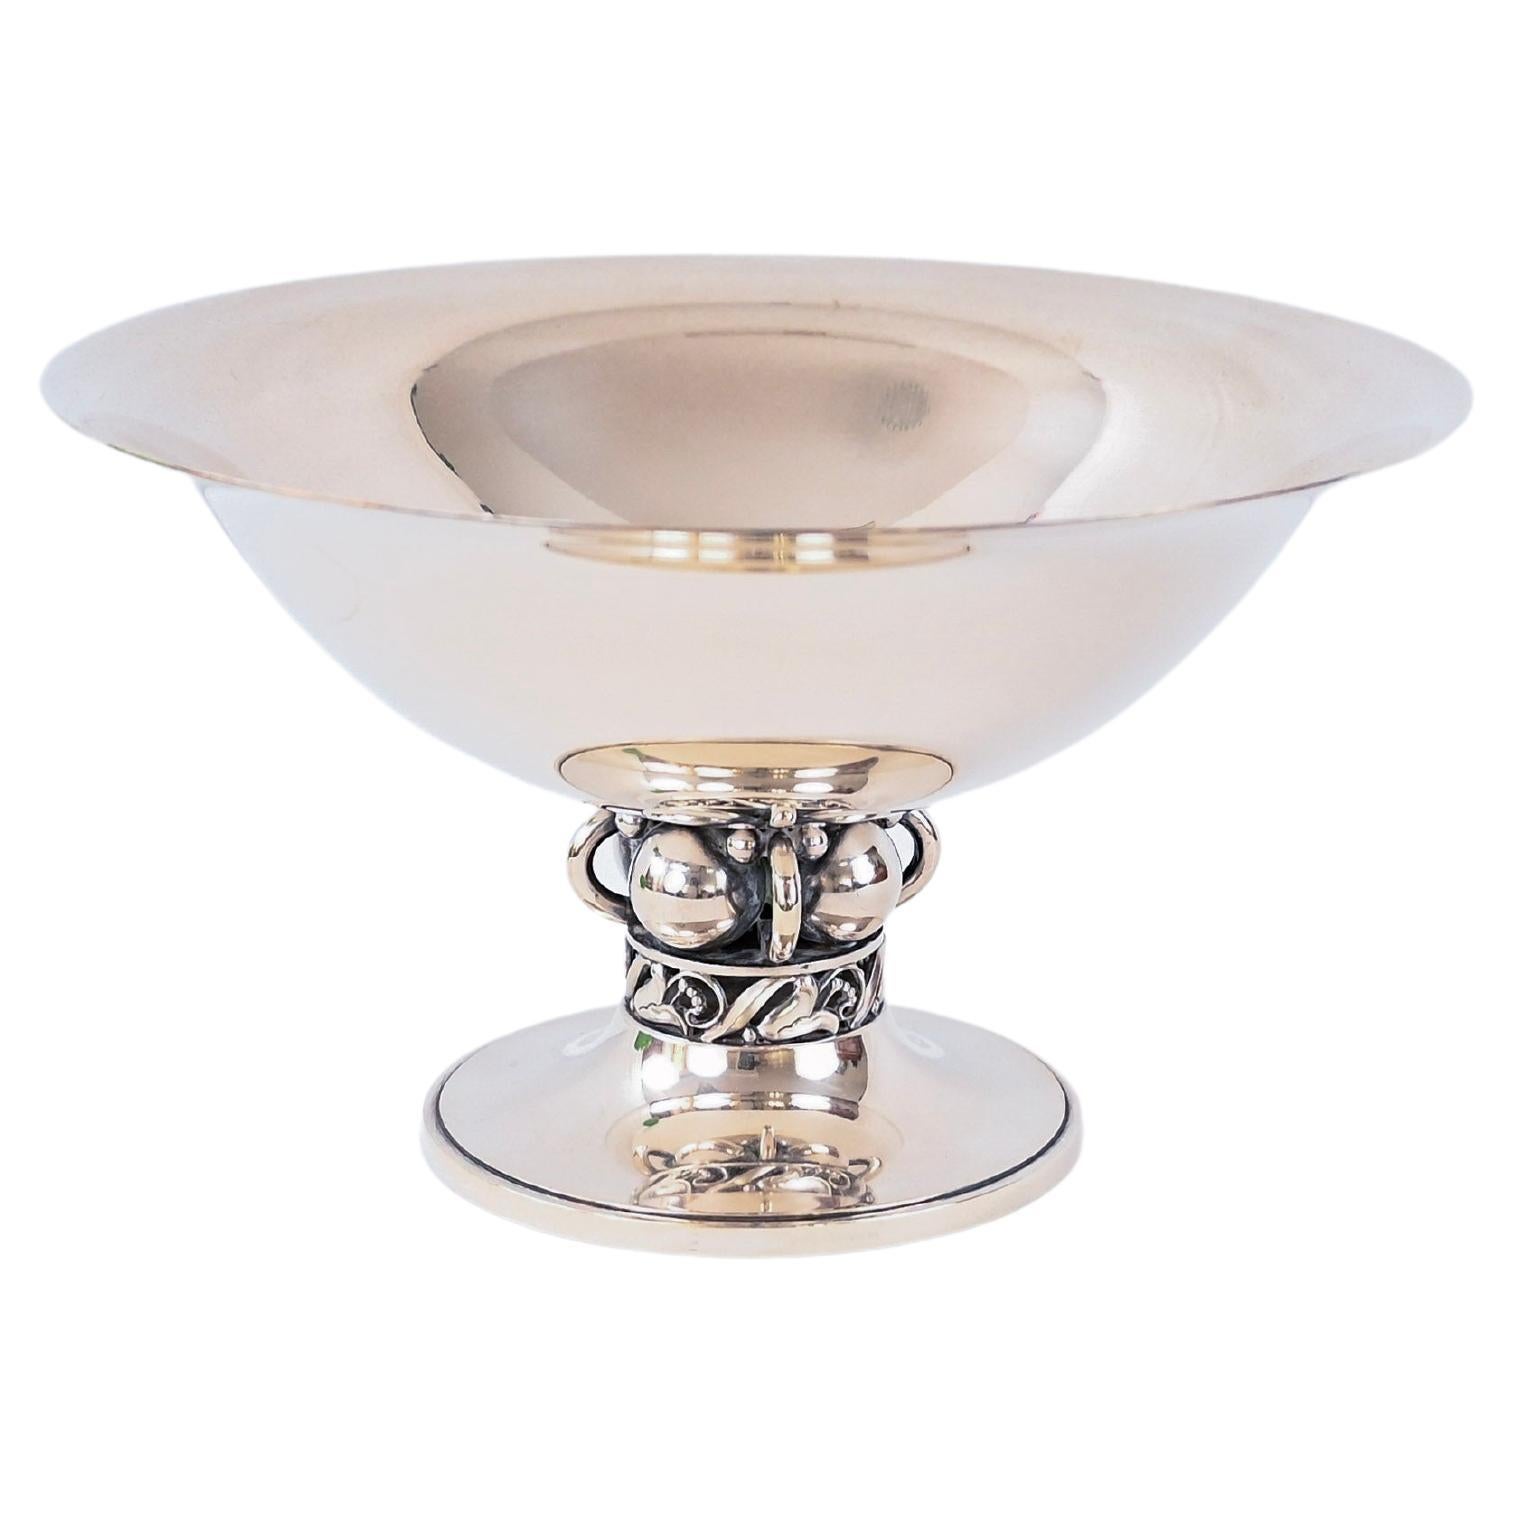 An impressive sterling silver bowl by Alphonse La Paglia for International Sterling. Alphonse La Paglia is known for his distinct designs and studied under Georg Jensen. This bowl has loop and ball detail on a footed bottom. It is numbered and